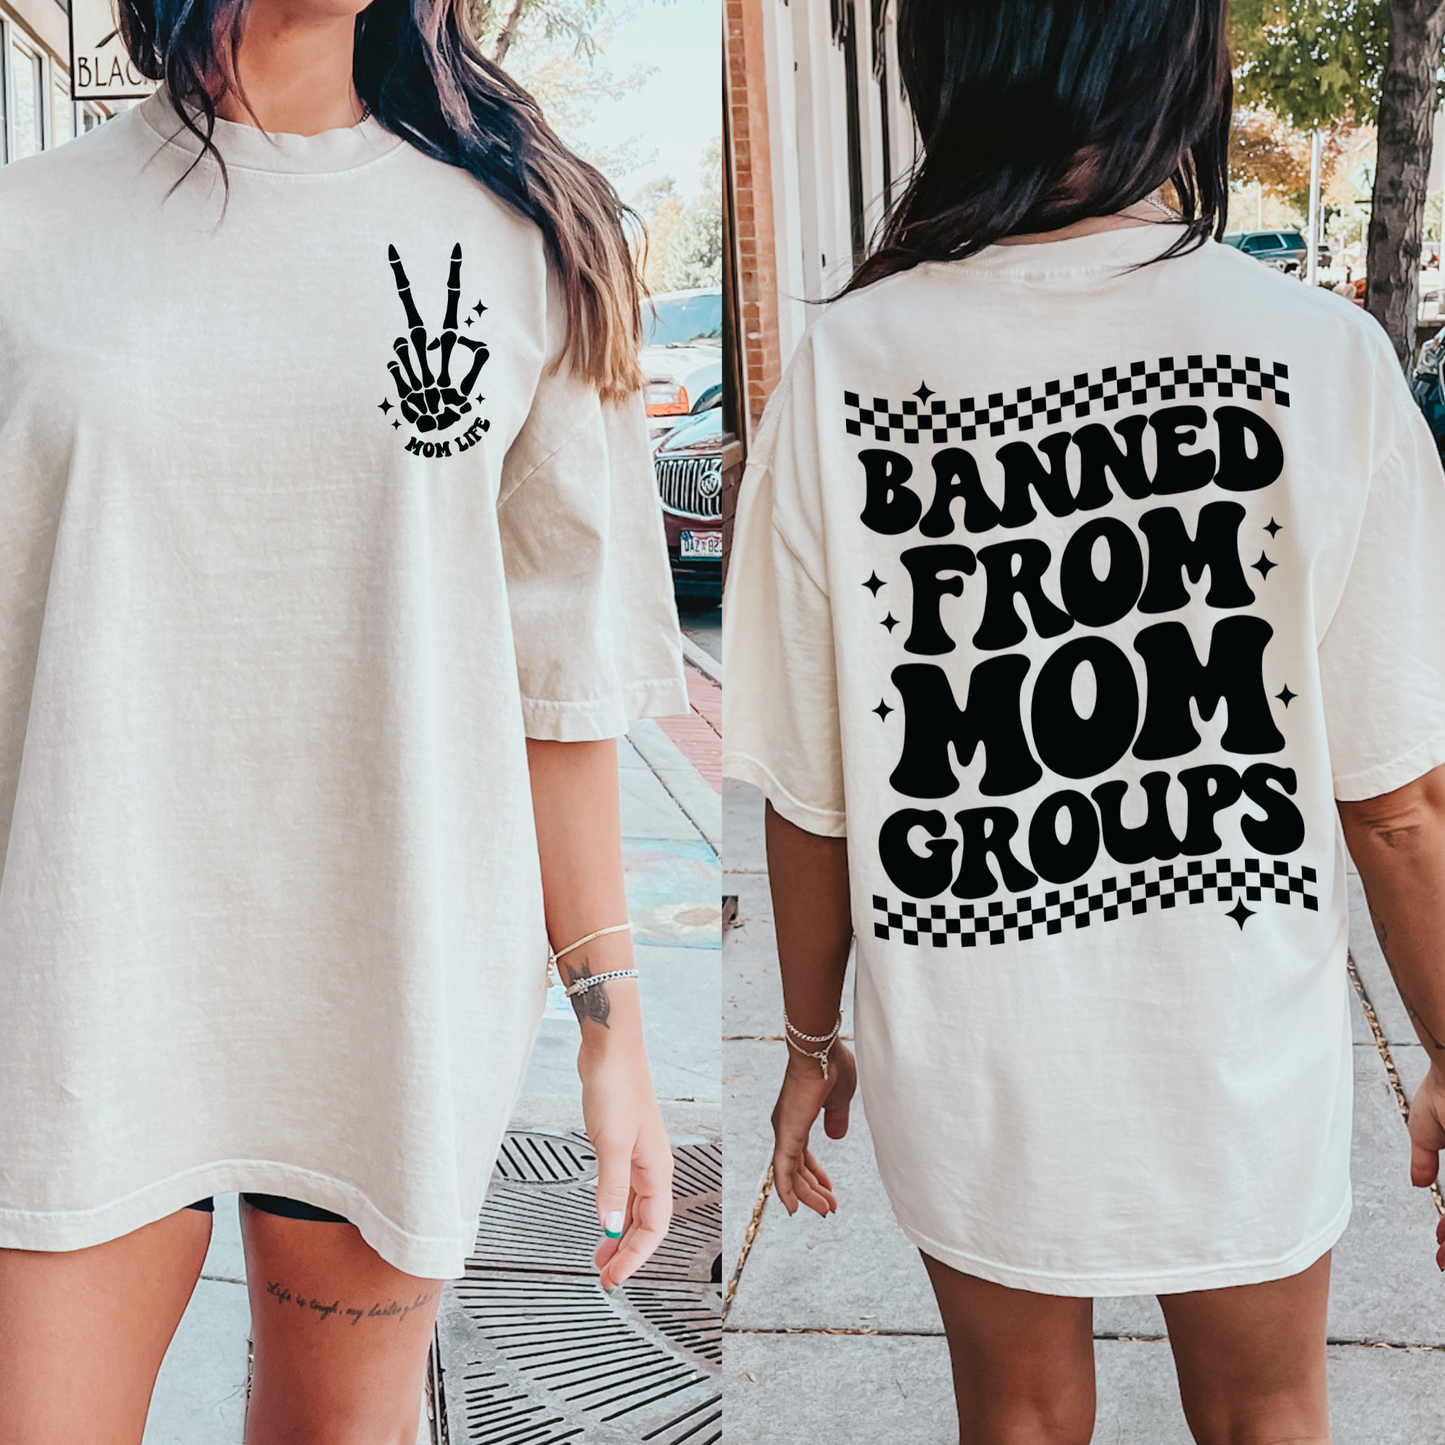 Banned from mom groups tee